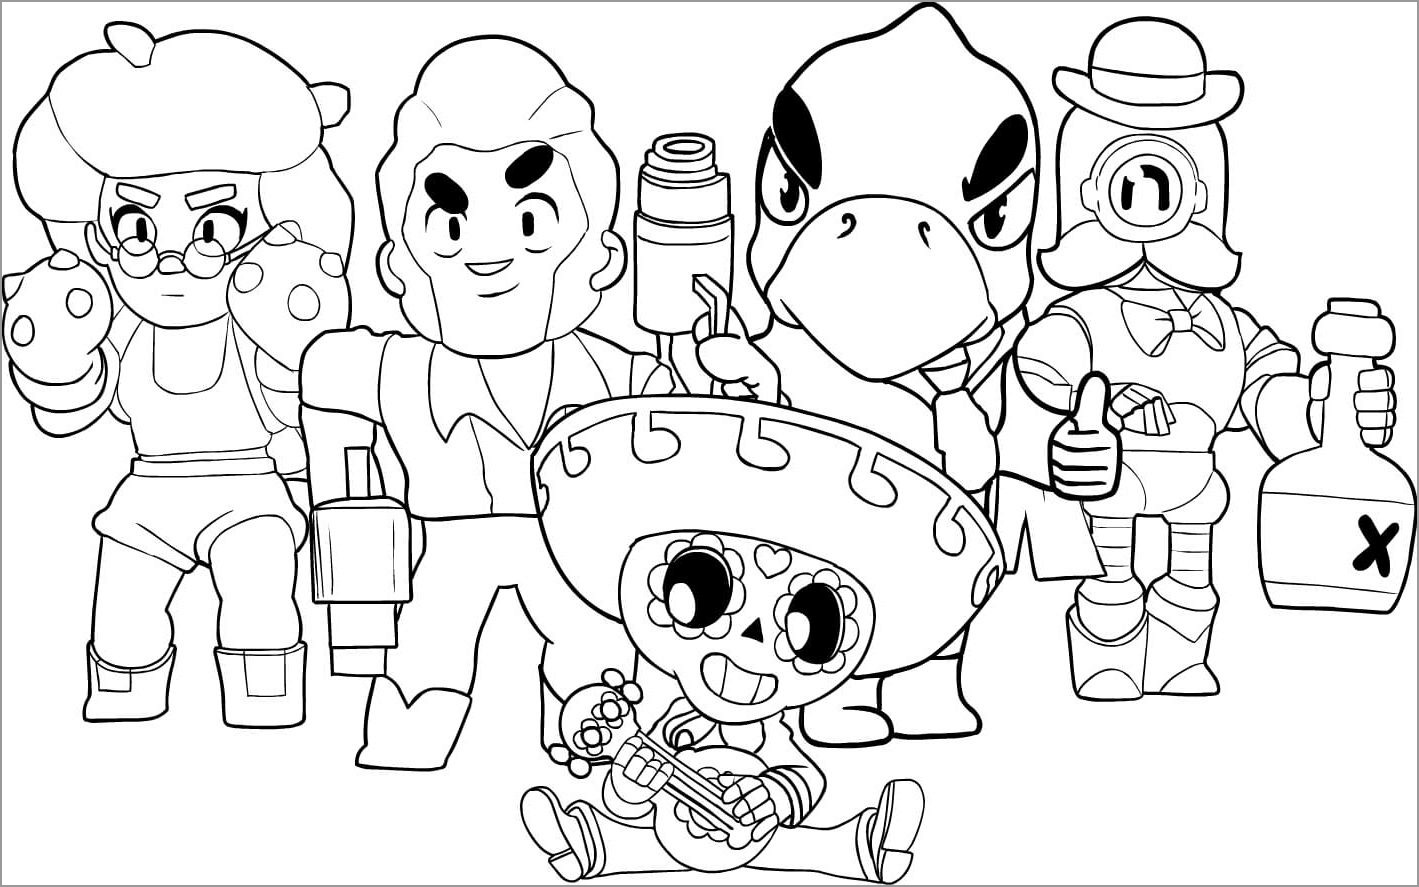 Brawl Stars Coloring Pages All Brawlers Coloringbay - brawl stars colouring